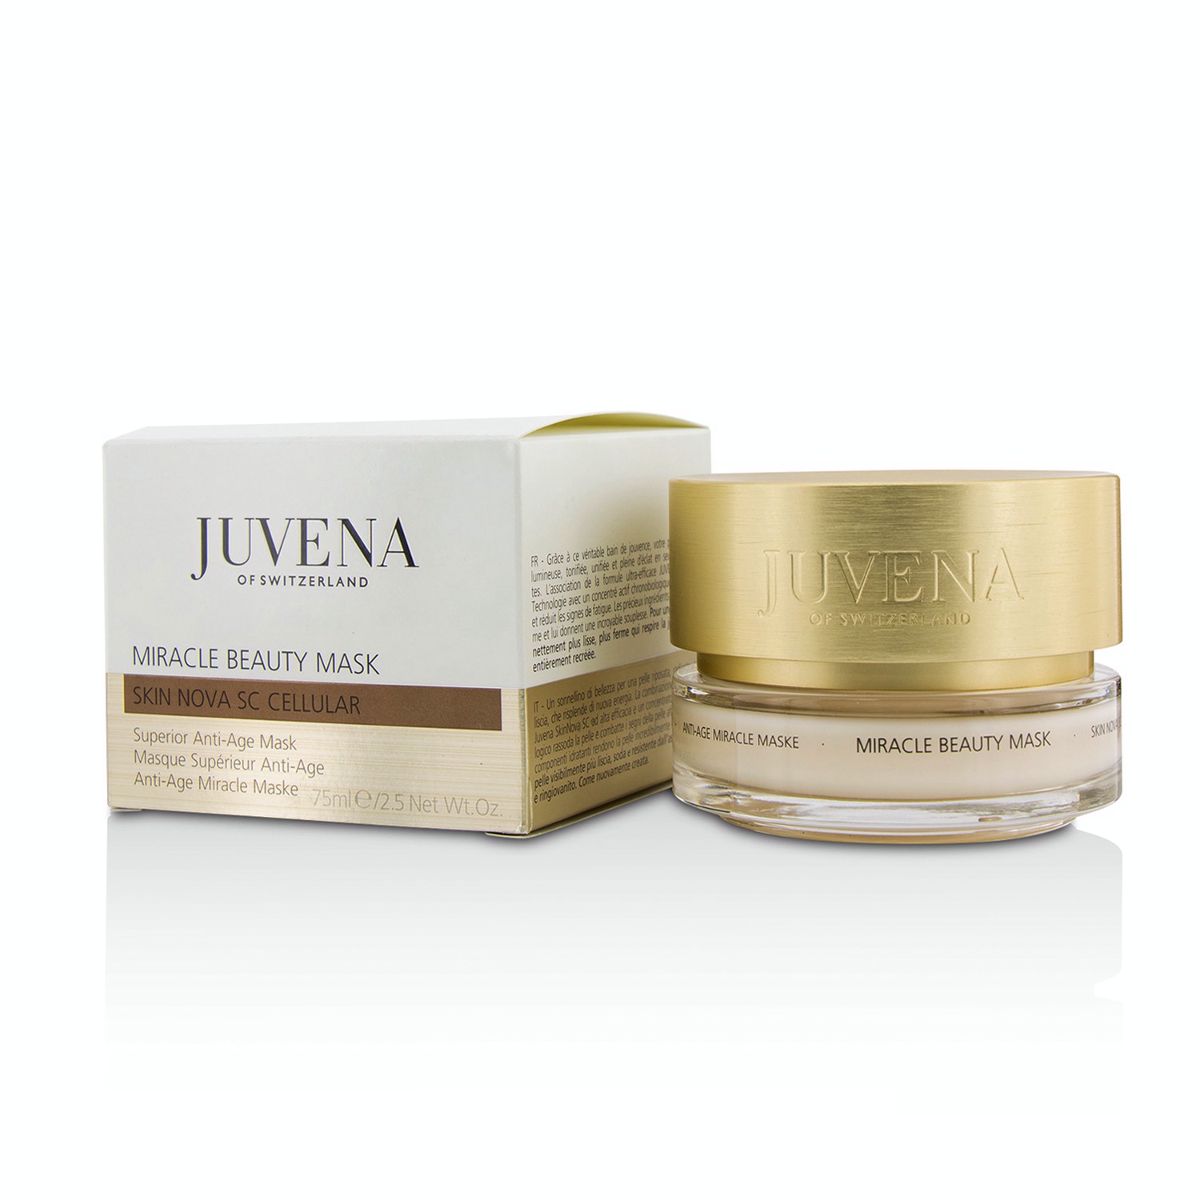 Miracle Beauty Mask - All Skin Types Juvena Image